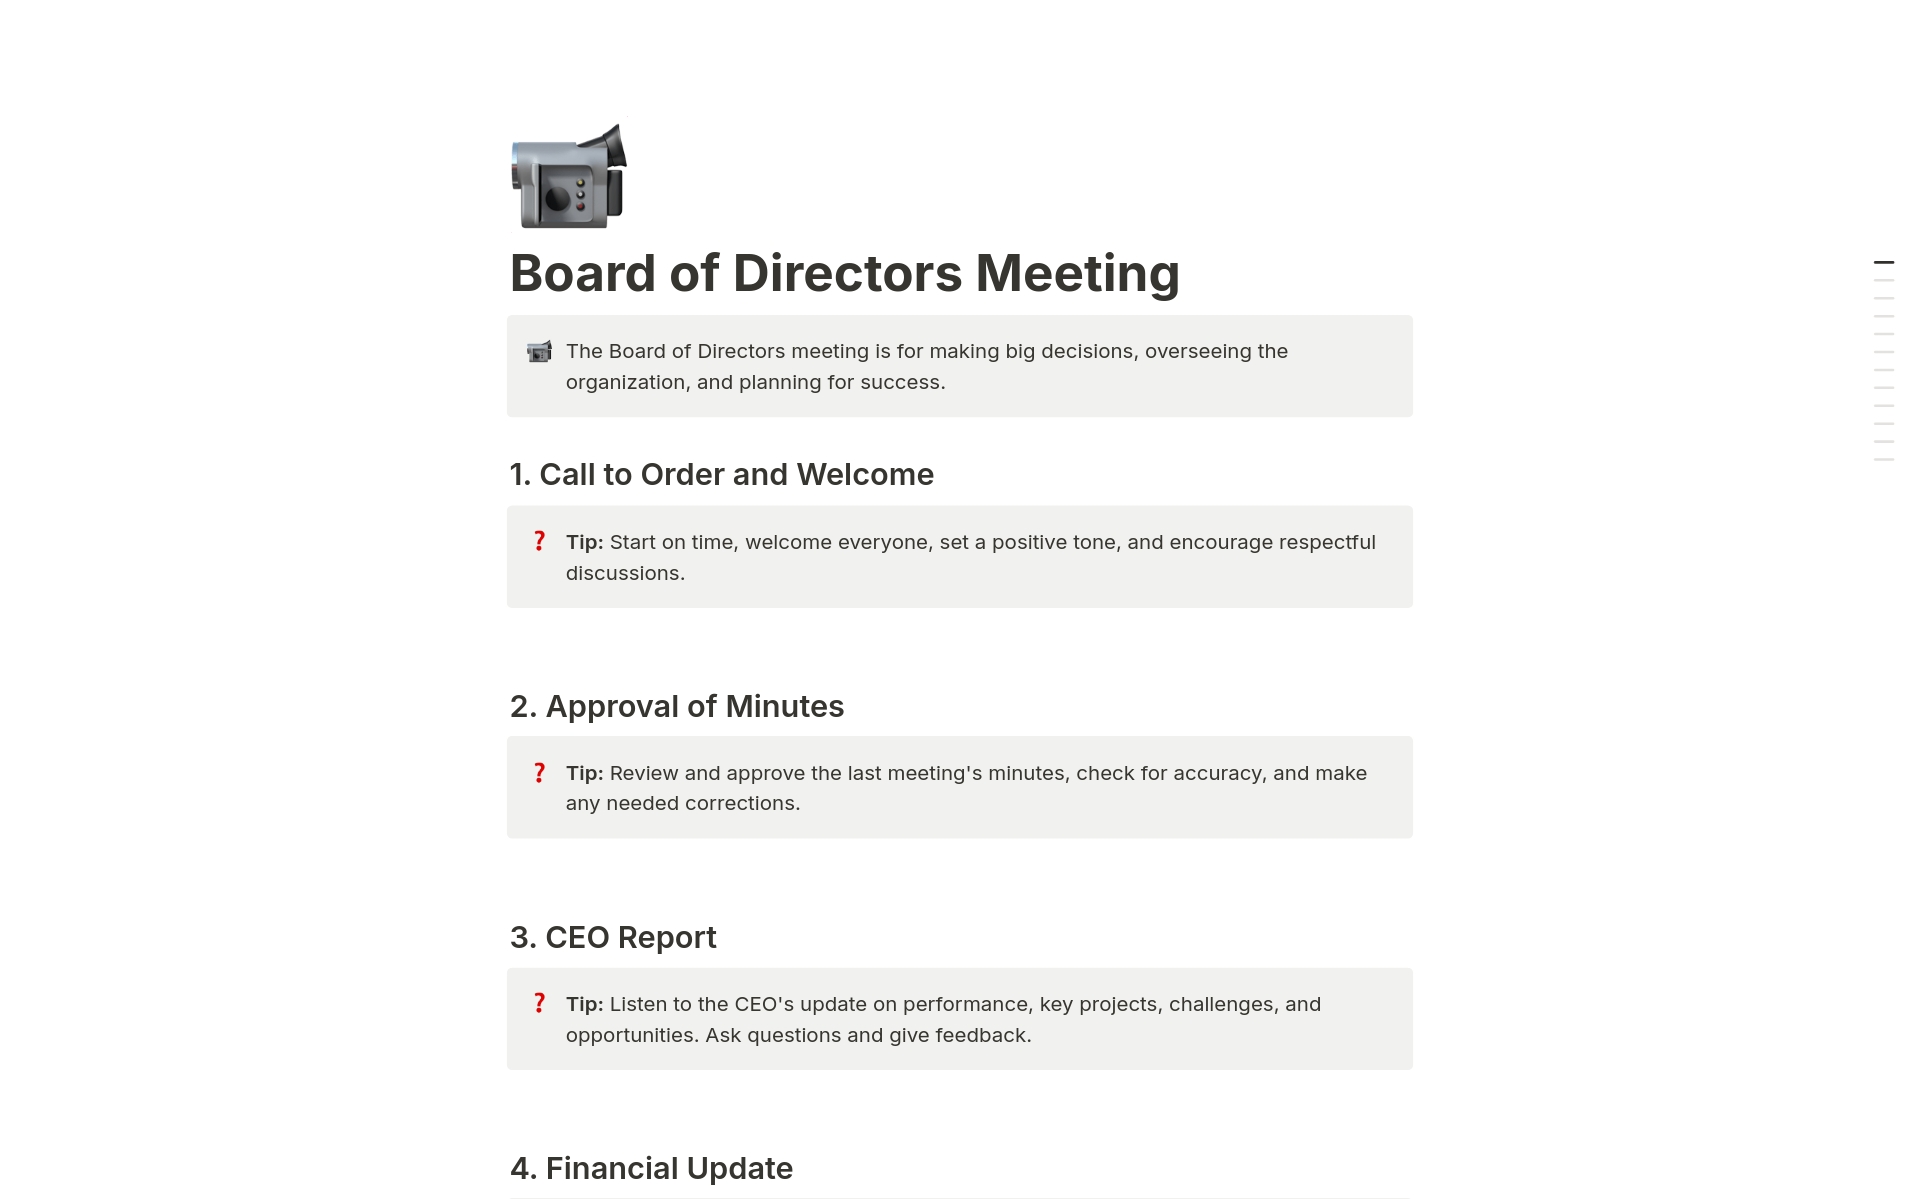 The Board of Directors meeting is for making big decisions, overseeing the organization, and planning for success.